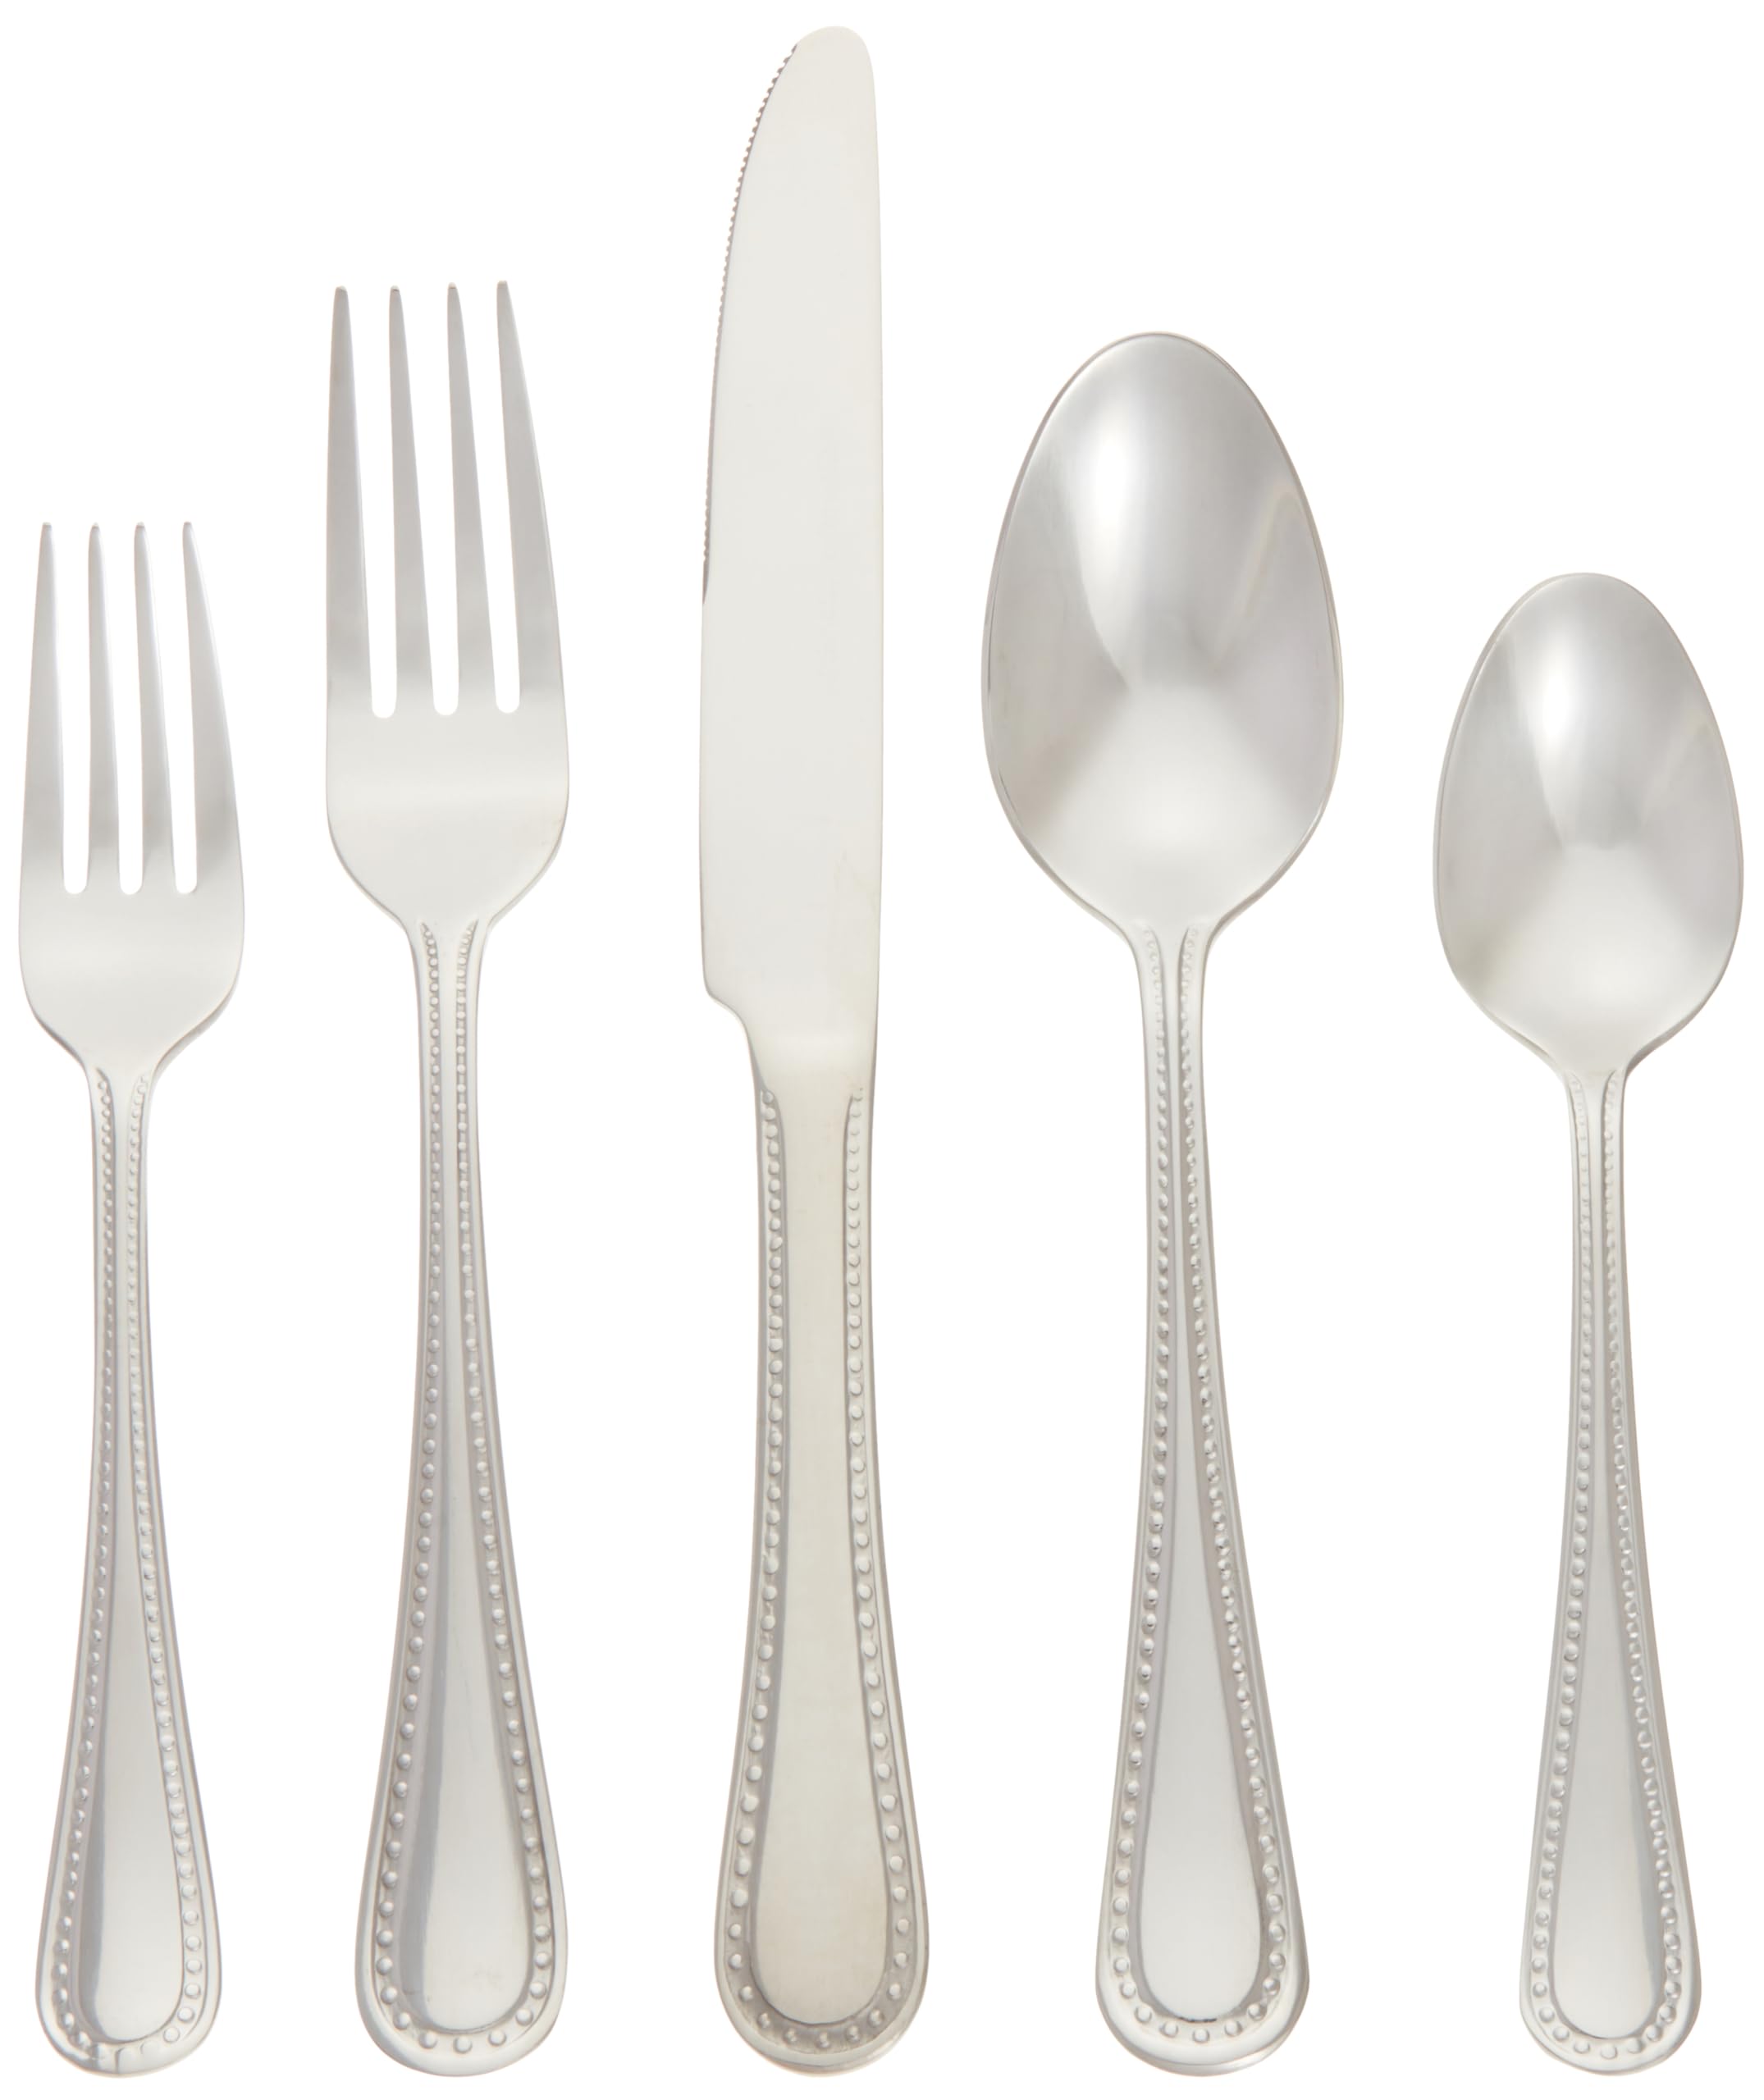 Amazon Basics 20-Piece Stainless Steel Flatware Set with Pearled Edge, Service for 4, Silver